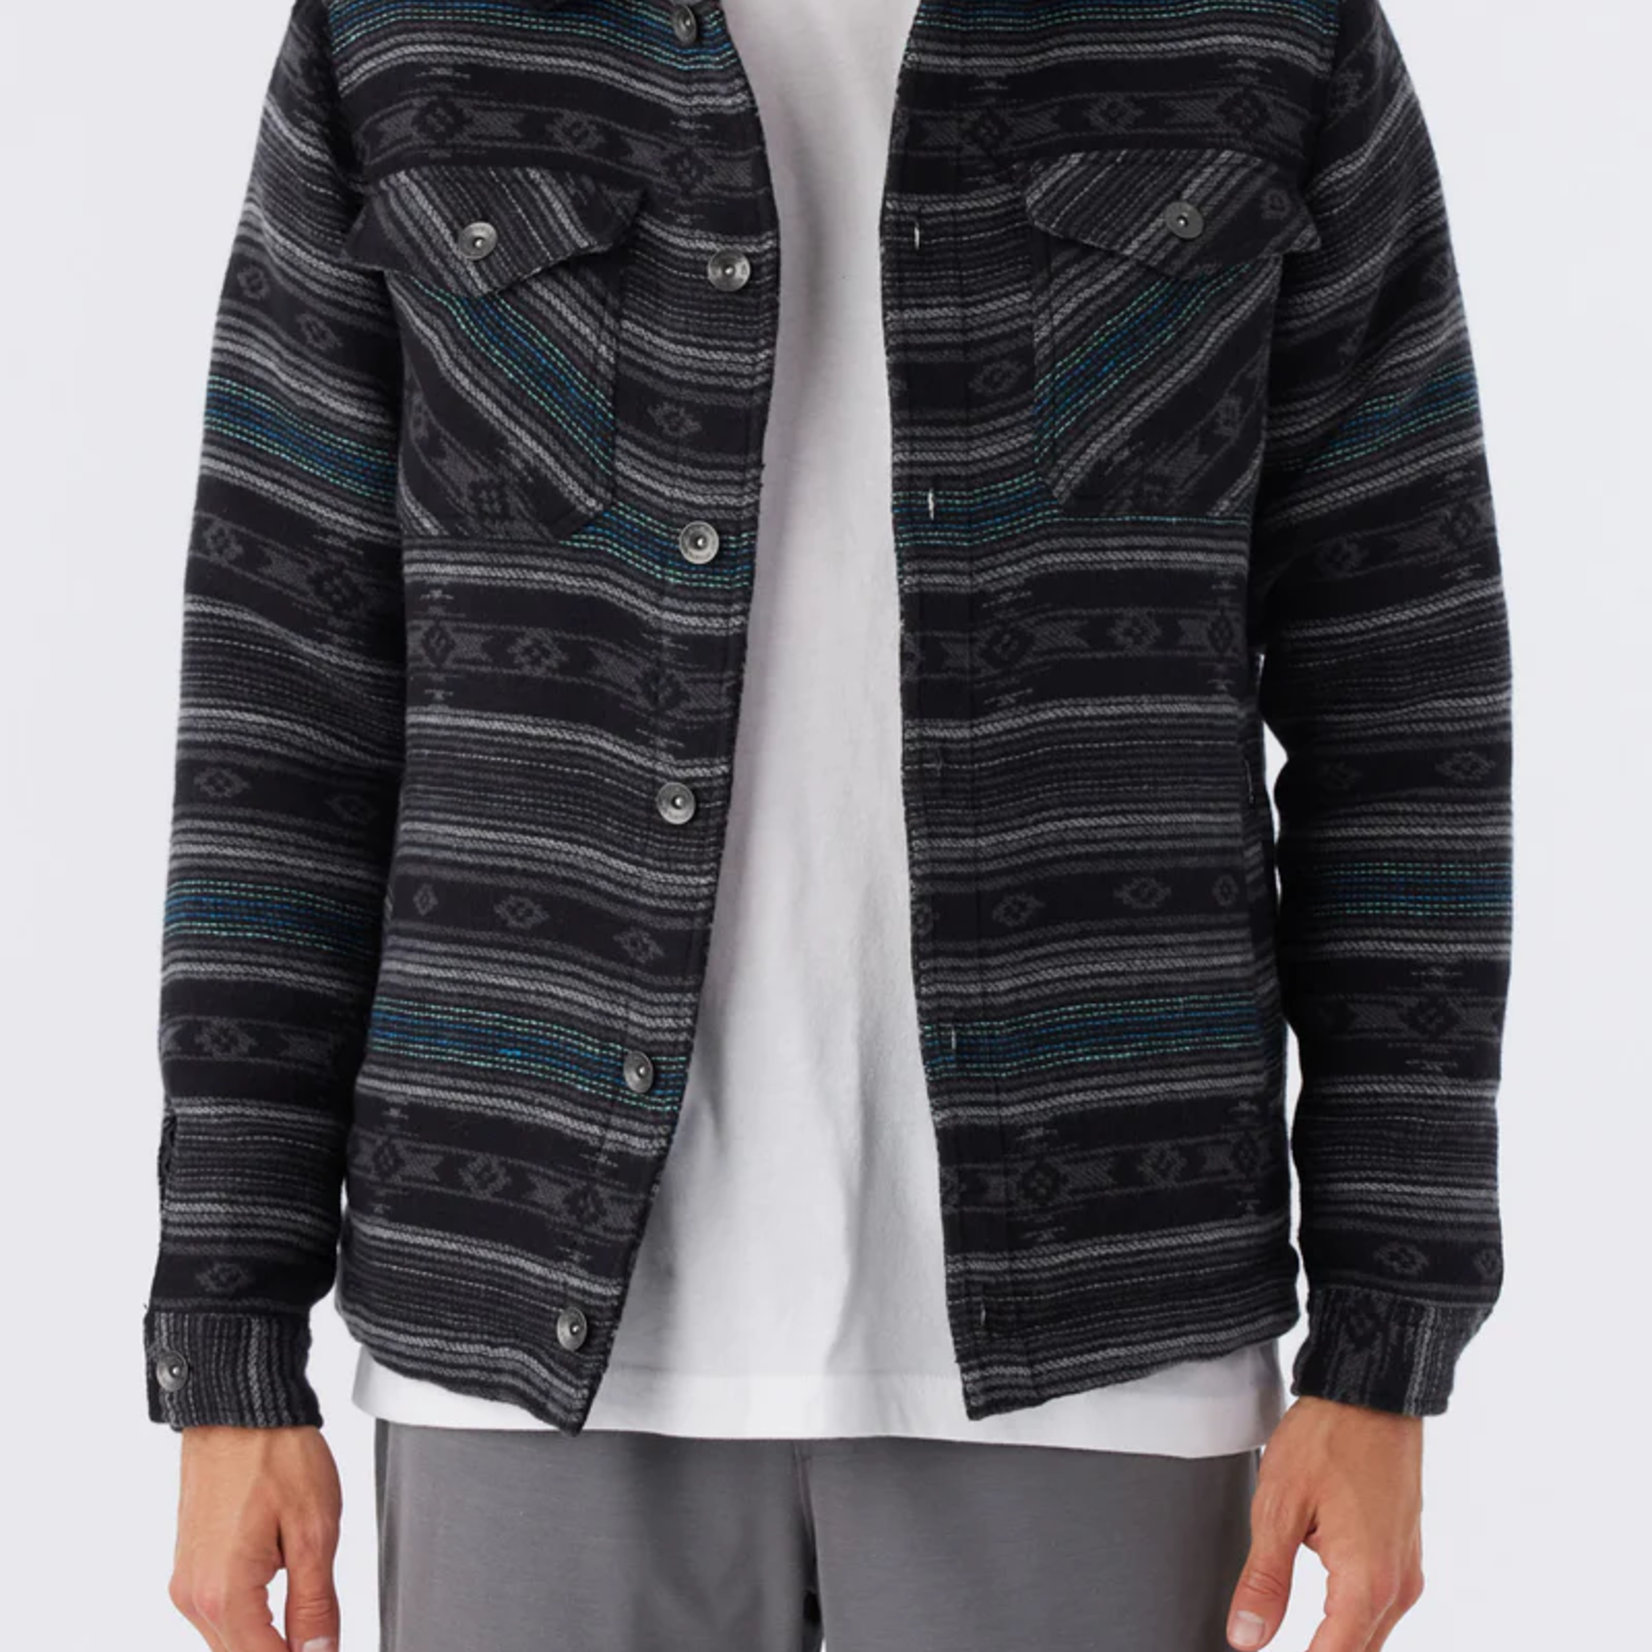 O'Neill Canada EXCURSION SHERPA LINED JACKET | Graphite